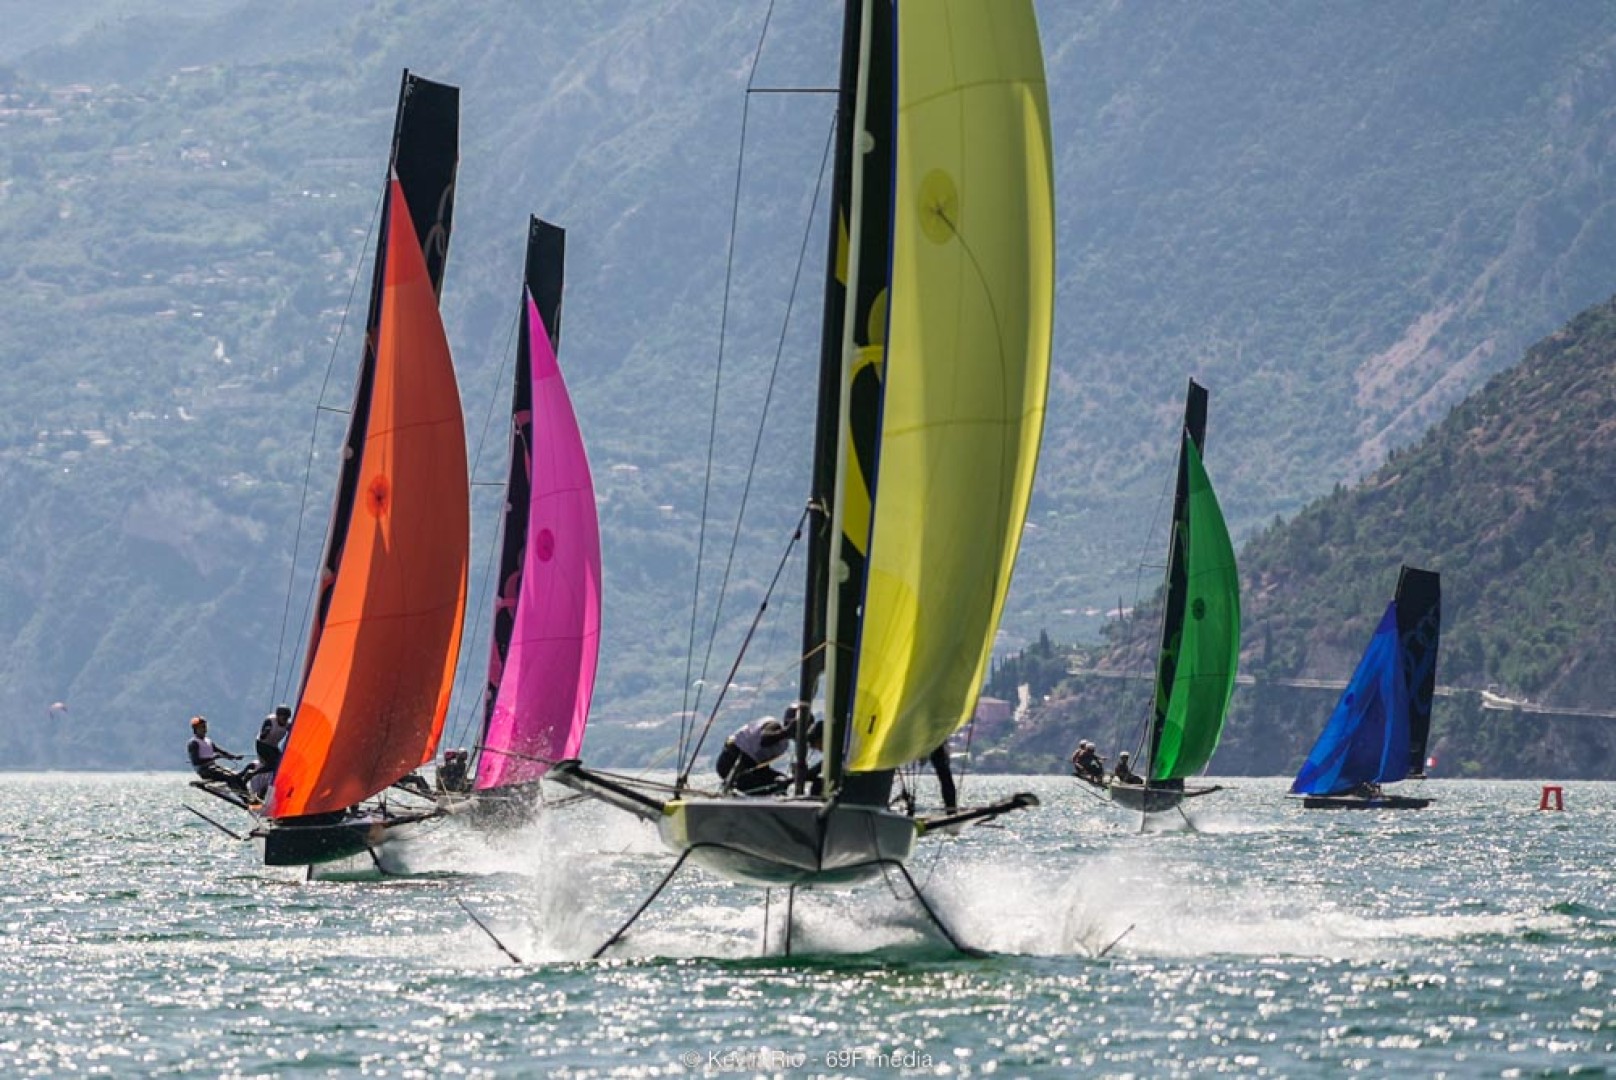 The 69F circuit continues with Act 4 of the Youth Foiling Gold Cup in Torbole